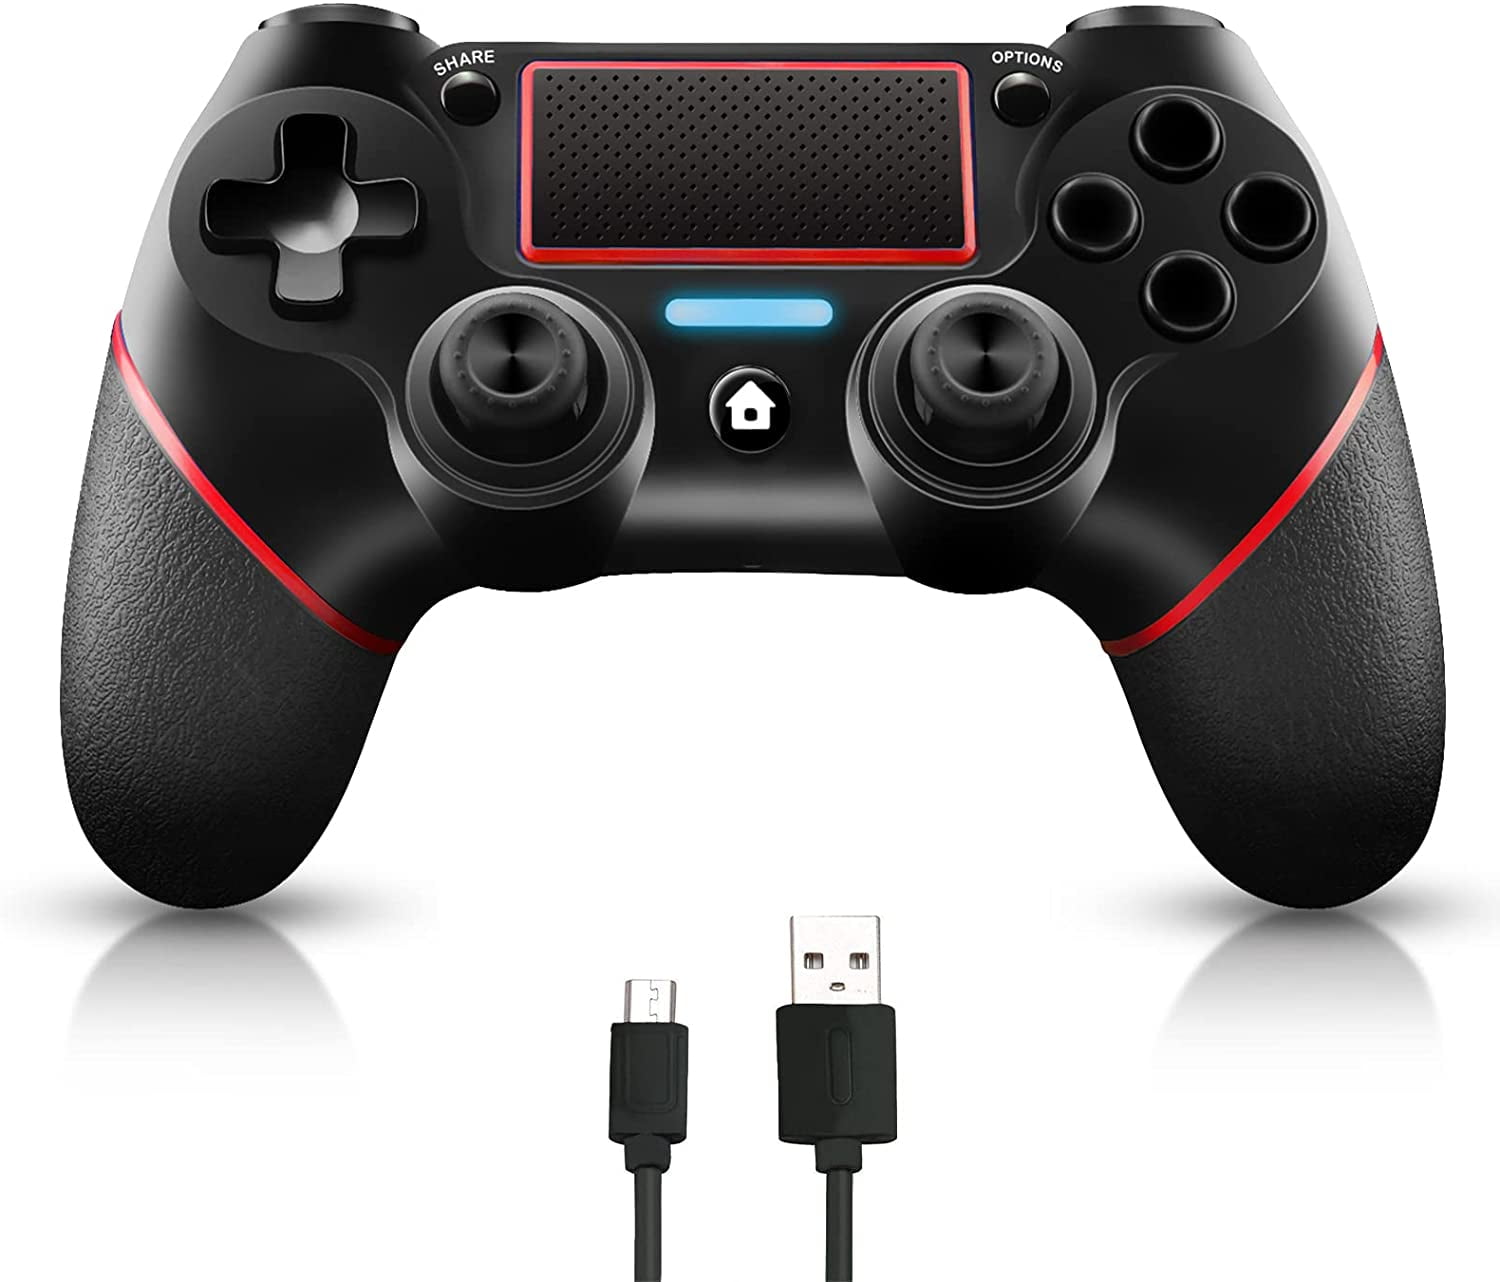 PS 4 джойстик на PC. Steam Wireless Cable. Wireless controller ps4